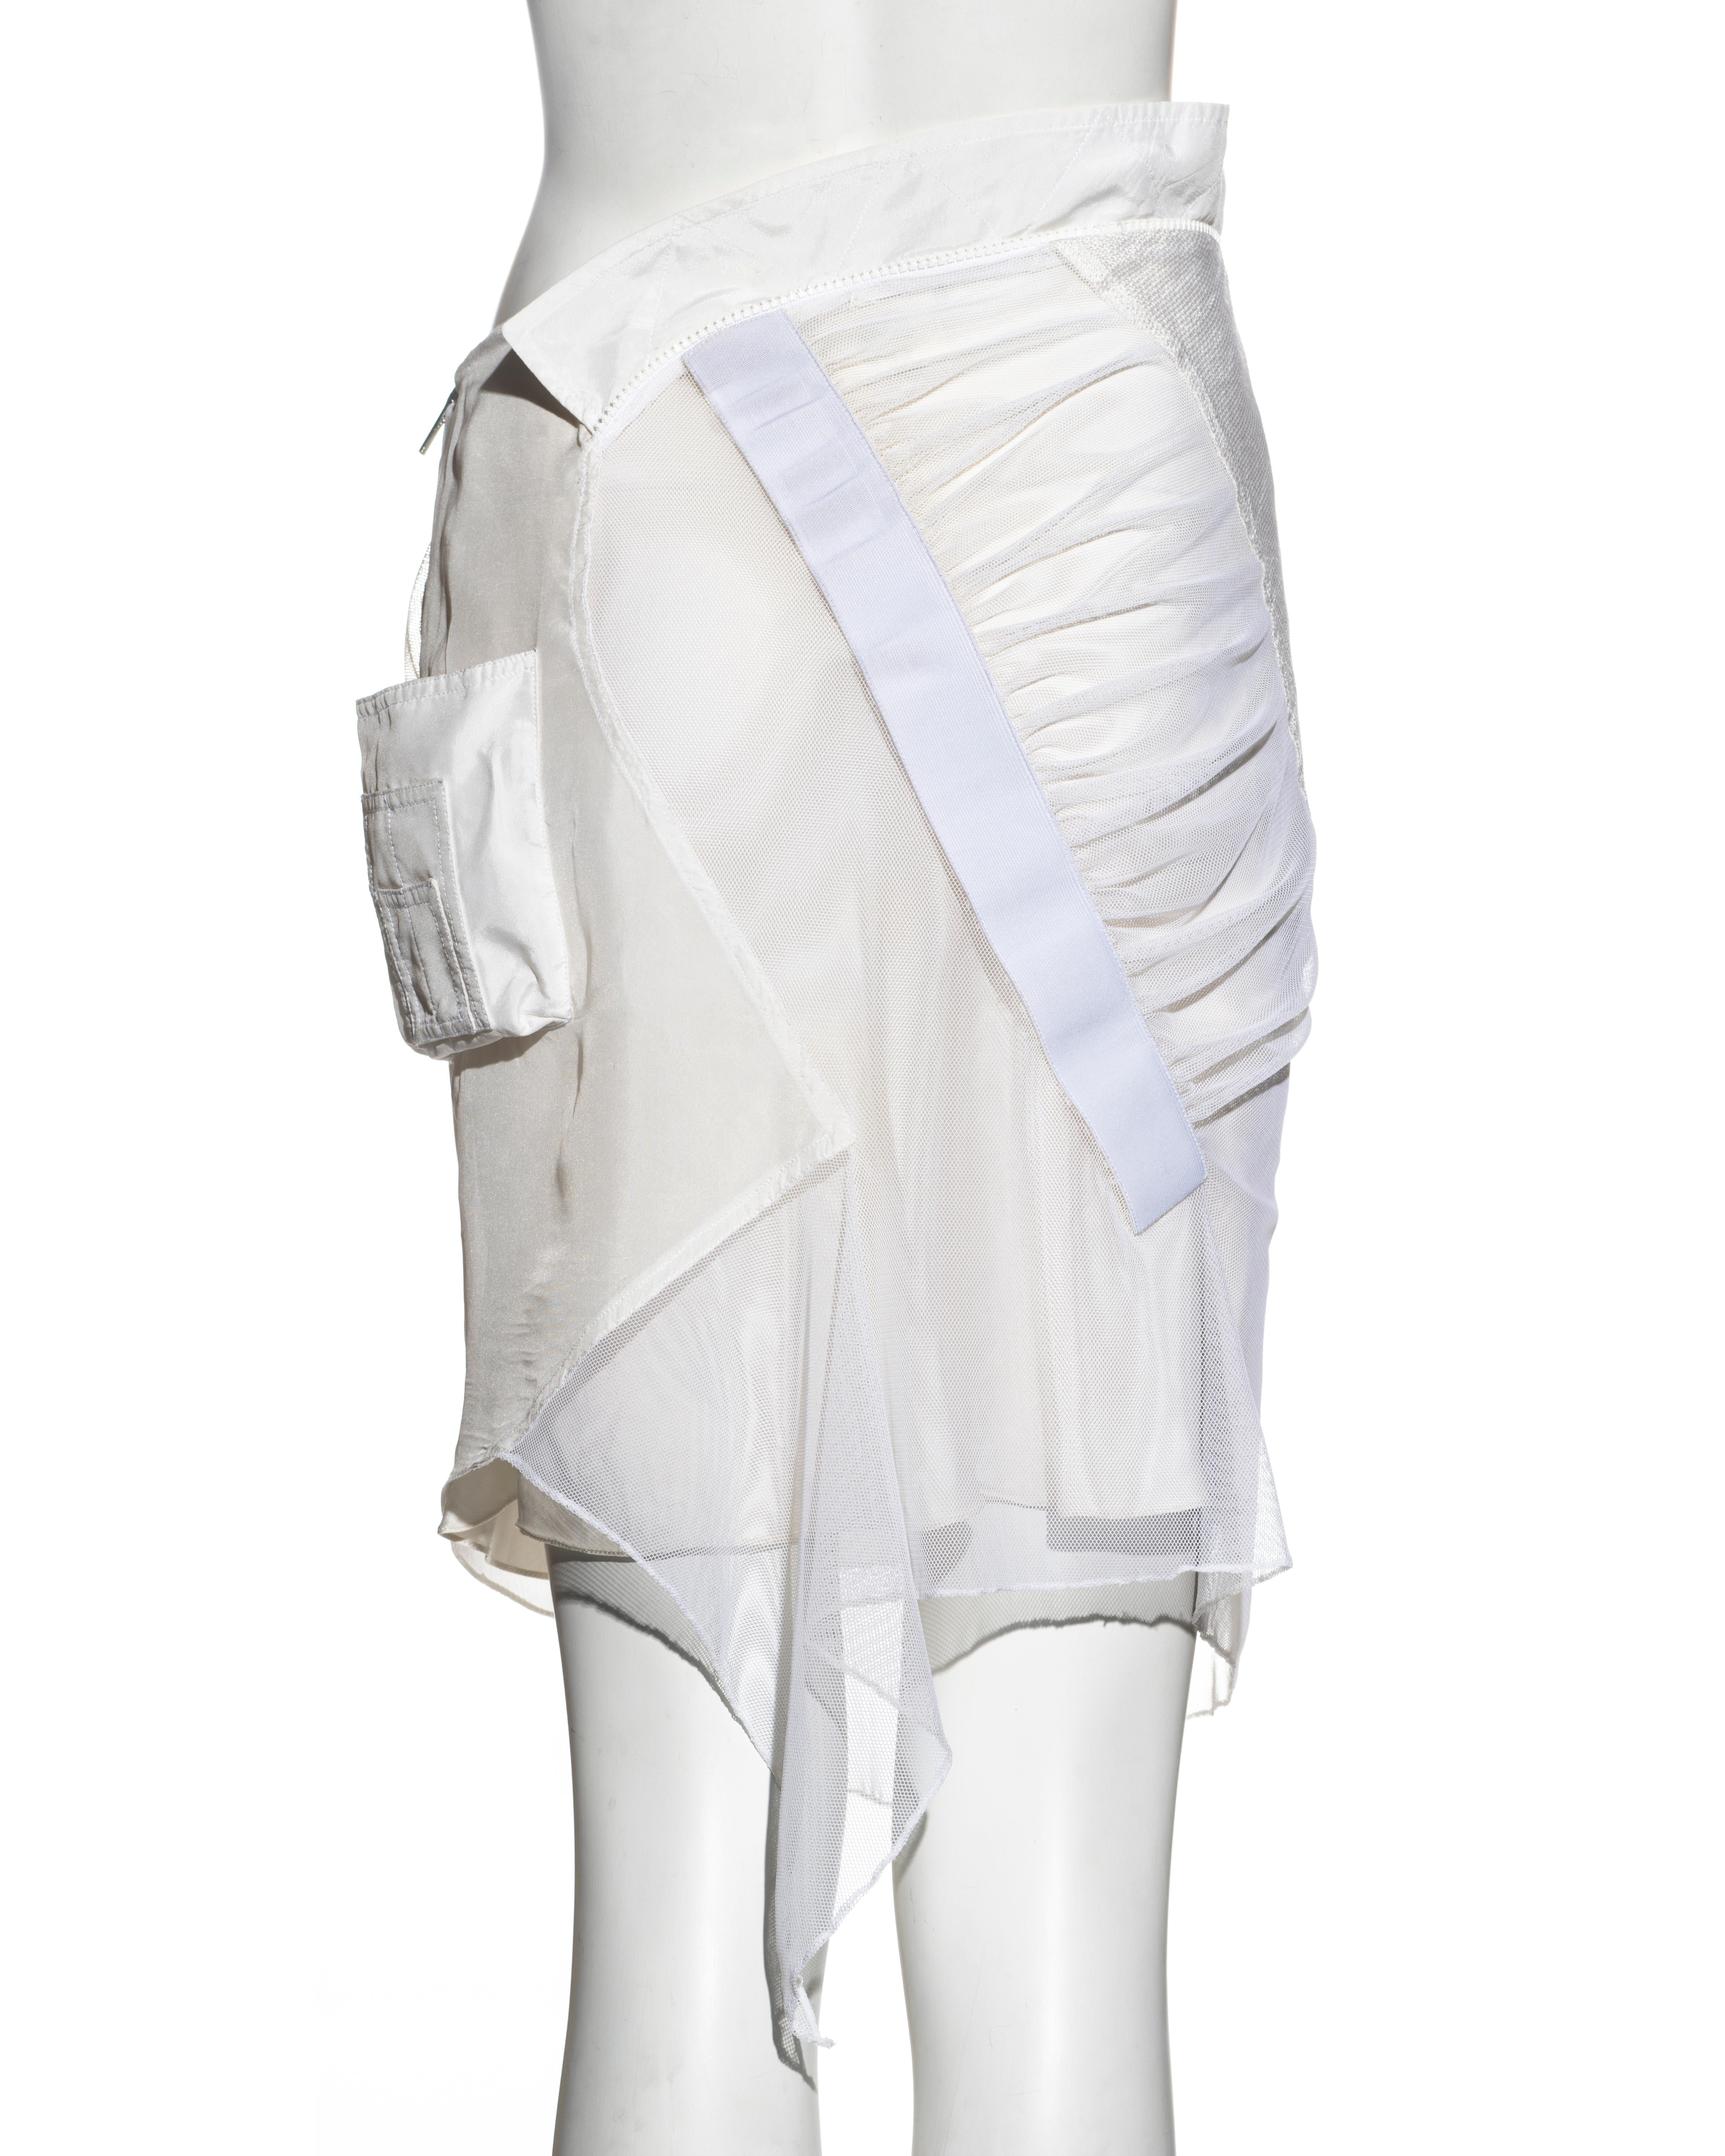 Christian Dior by John Galliano white mesh and silk deconstructed skirt,  ss 2002 4